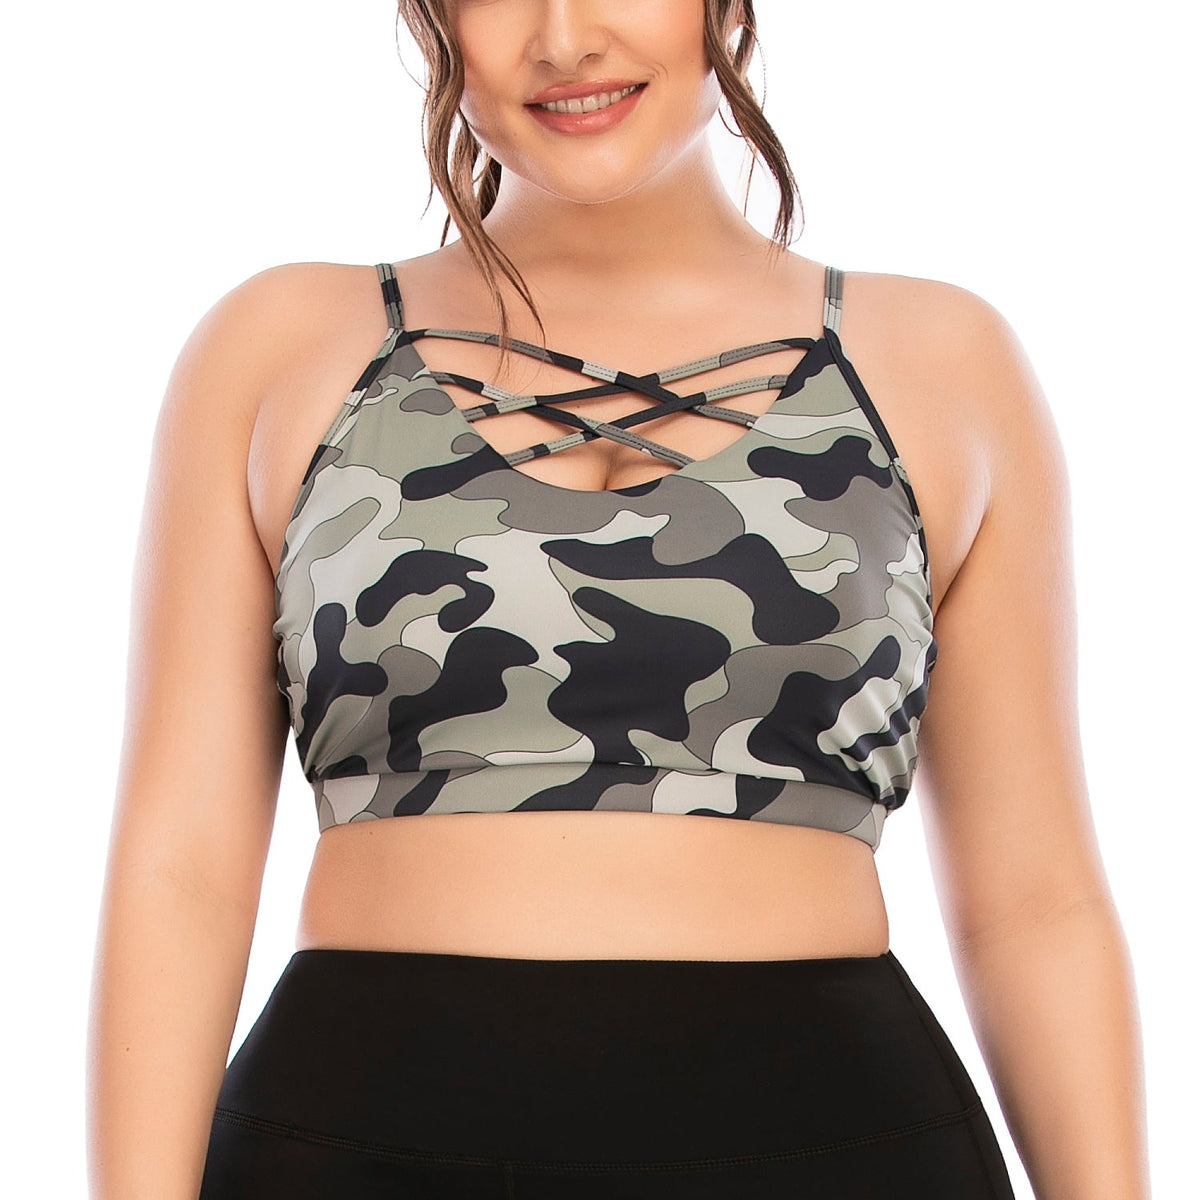 Plus Size Yoga Tops for Impact